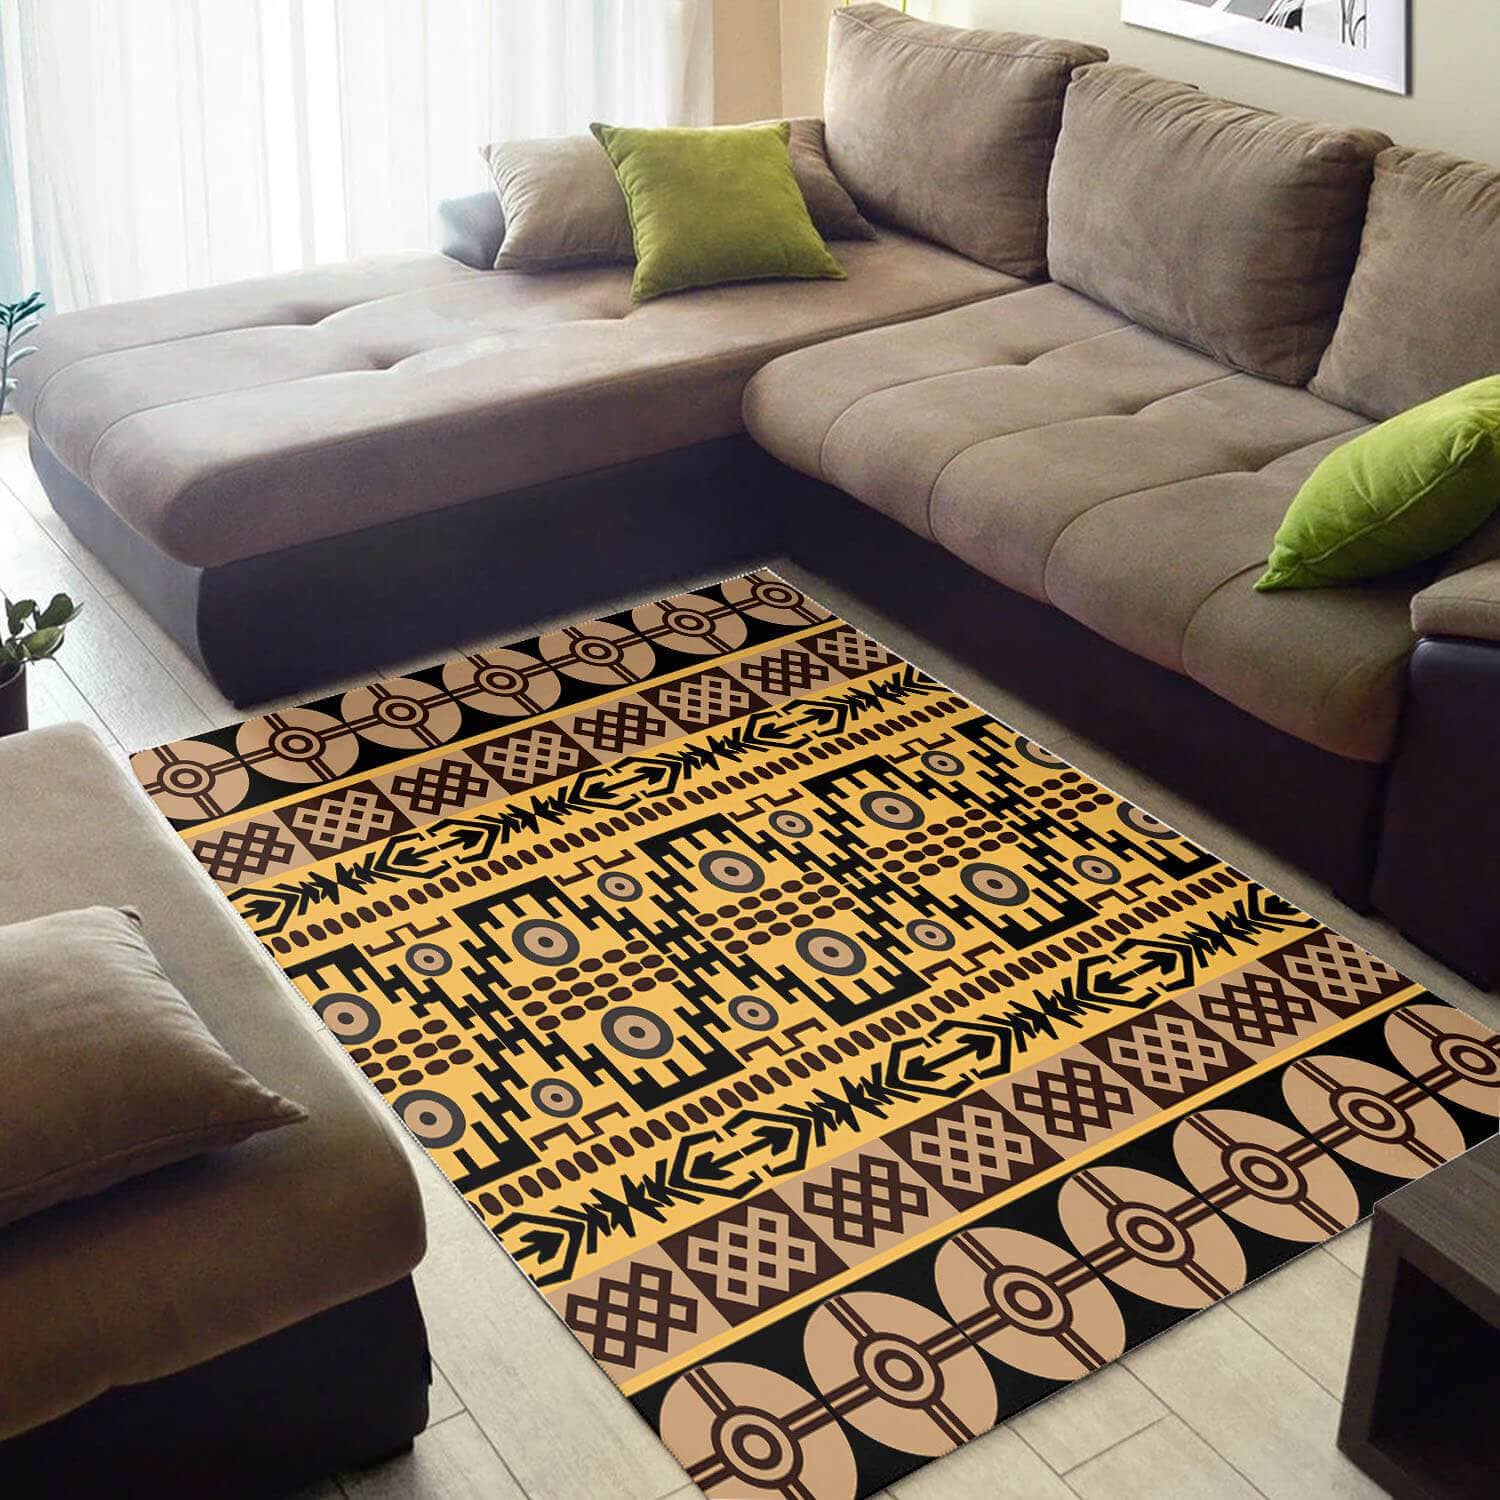 Beautiful African Style Abstract American Black Art Ethnic Seamless Pattern Floor Themed Home Rug